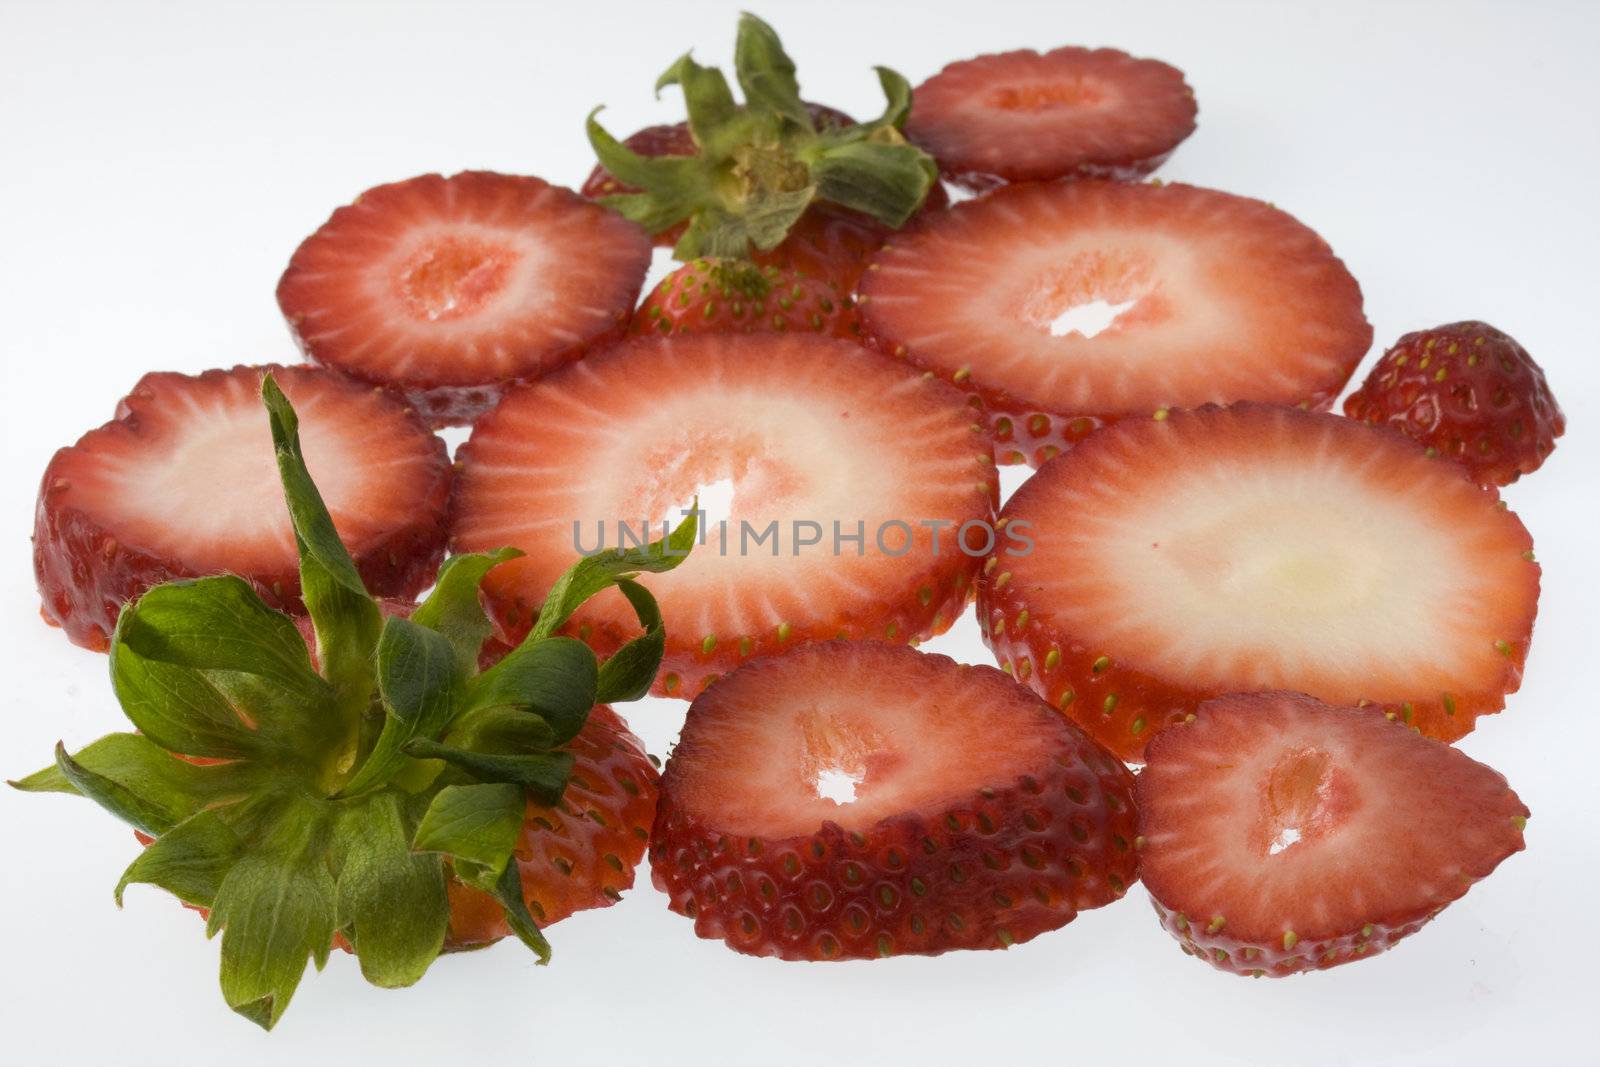 two fresh red strawberries with green leaves sliced